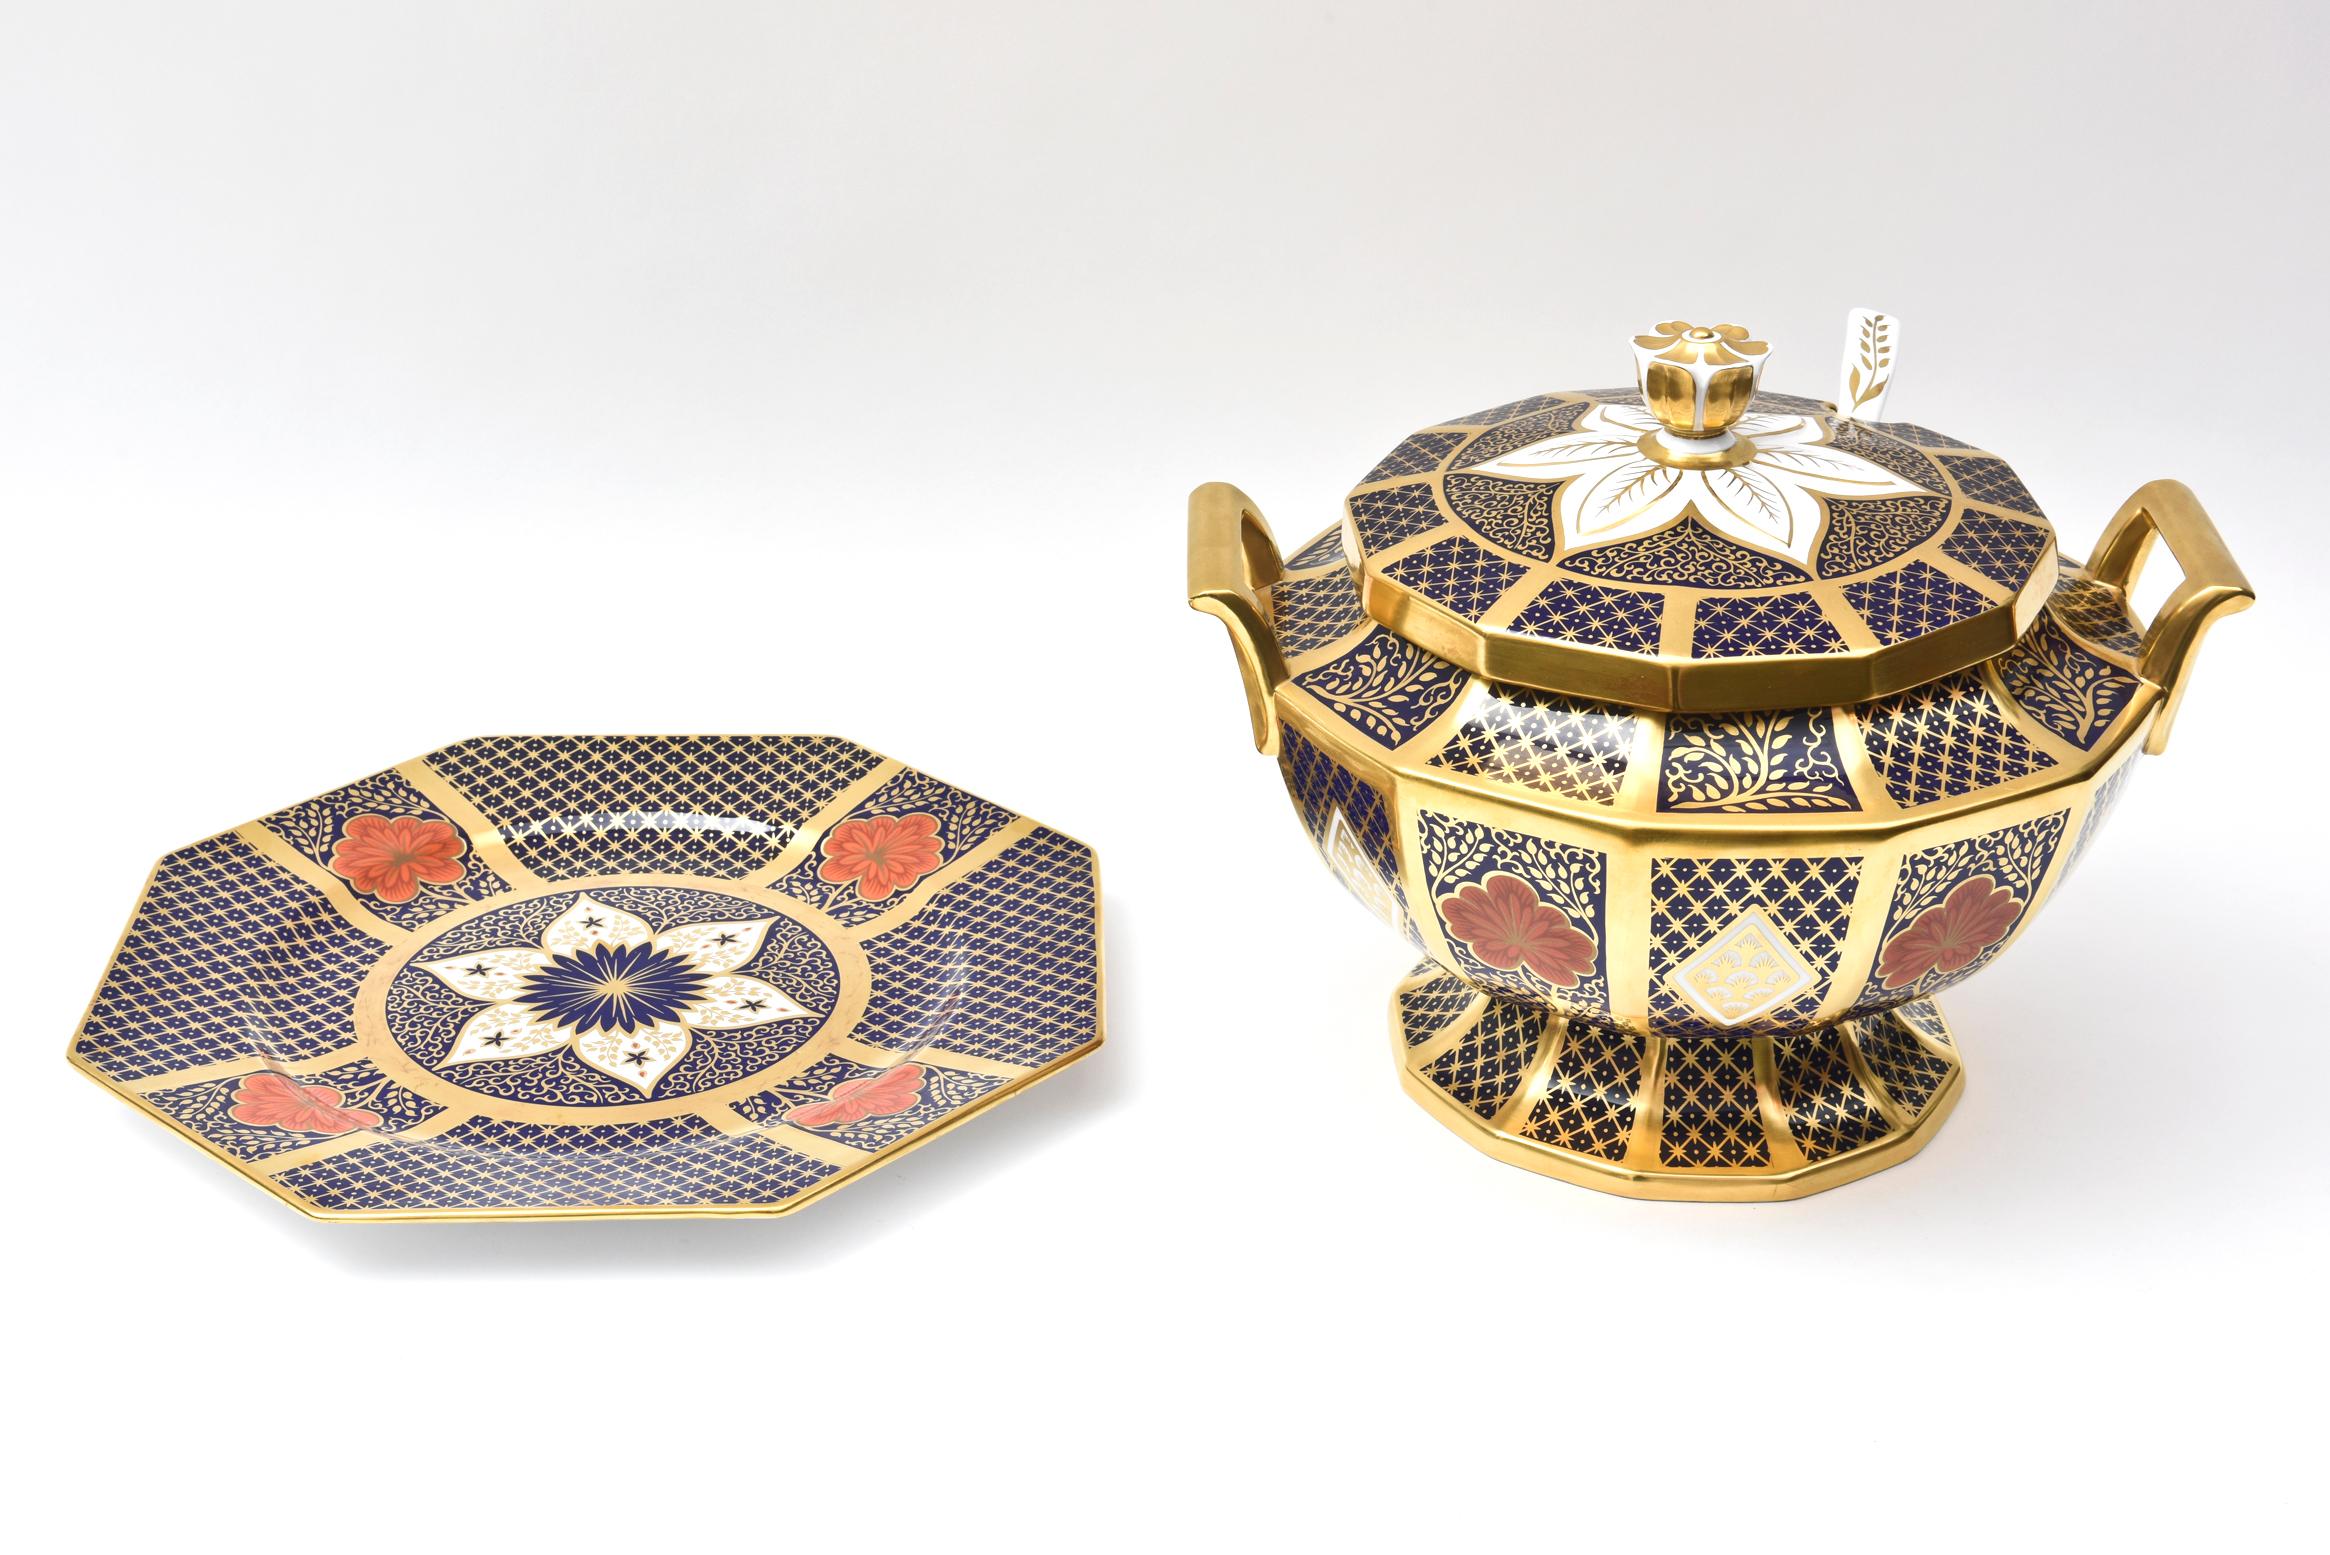 Late 20th Century English Porcelain Imari Pattern Tureen with Underplate, Vibrantly Painted